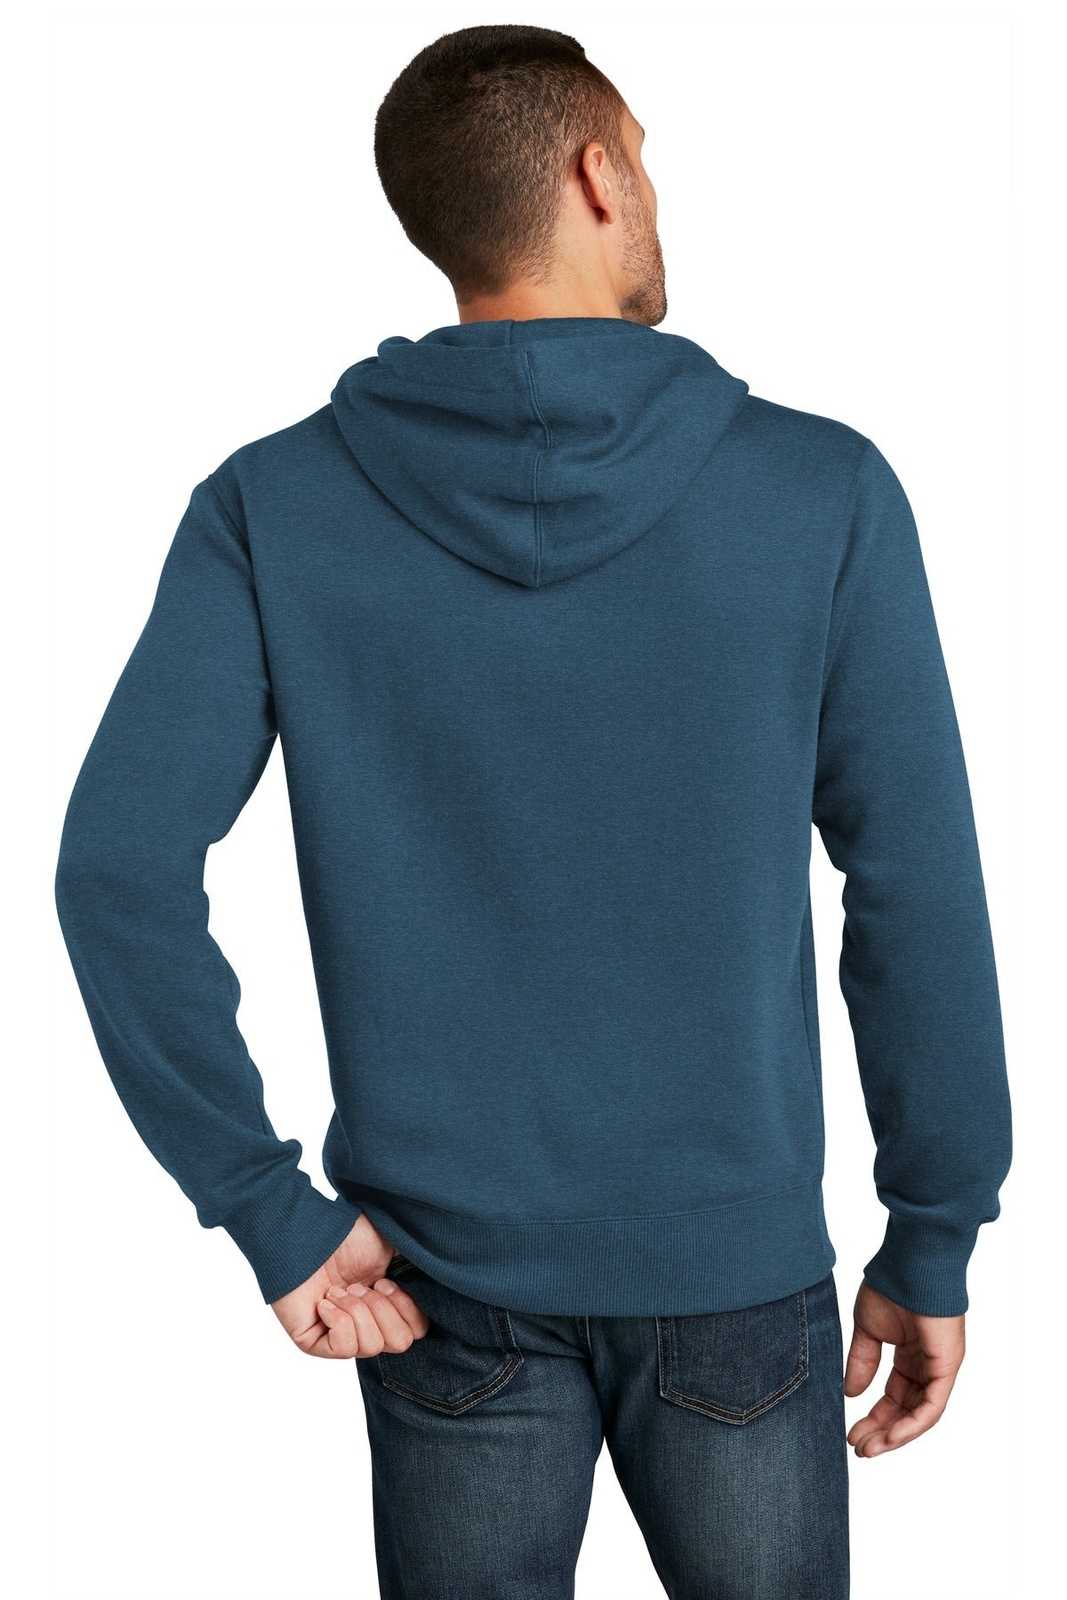 District DT1101 Perfect Weight Fleece Hoodie - Heathered Poseidon Blue - HIT a Double - 2